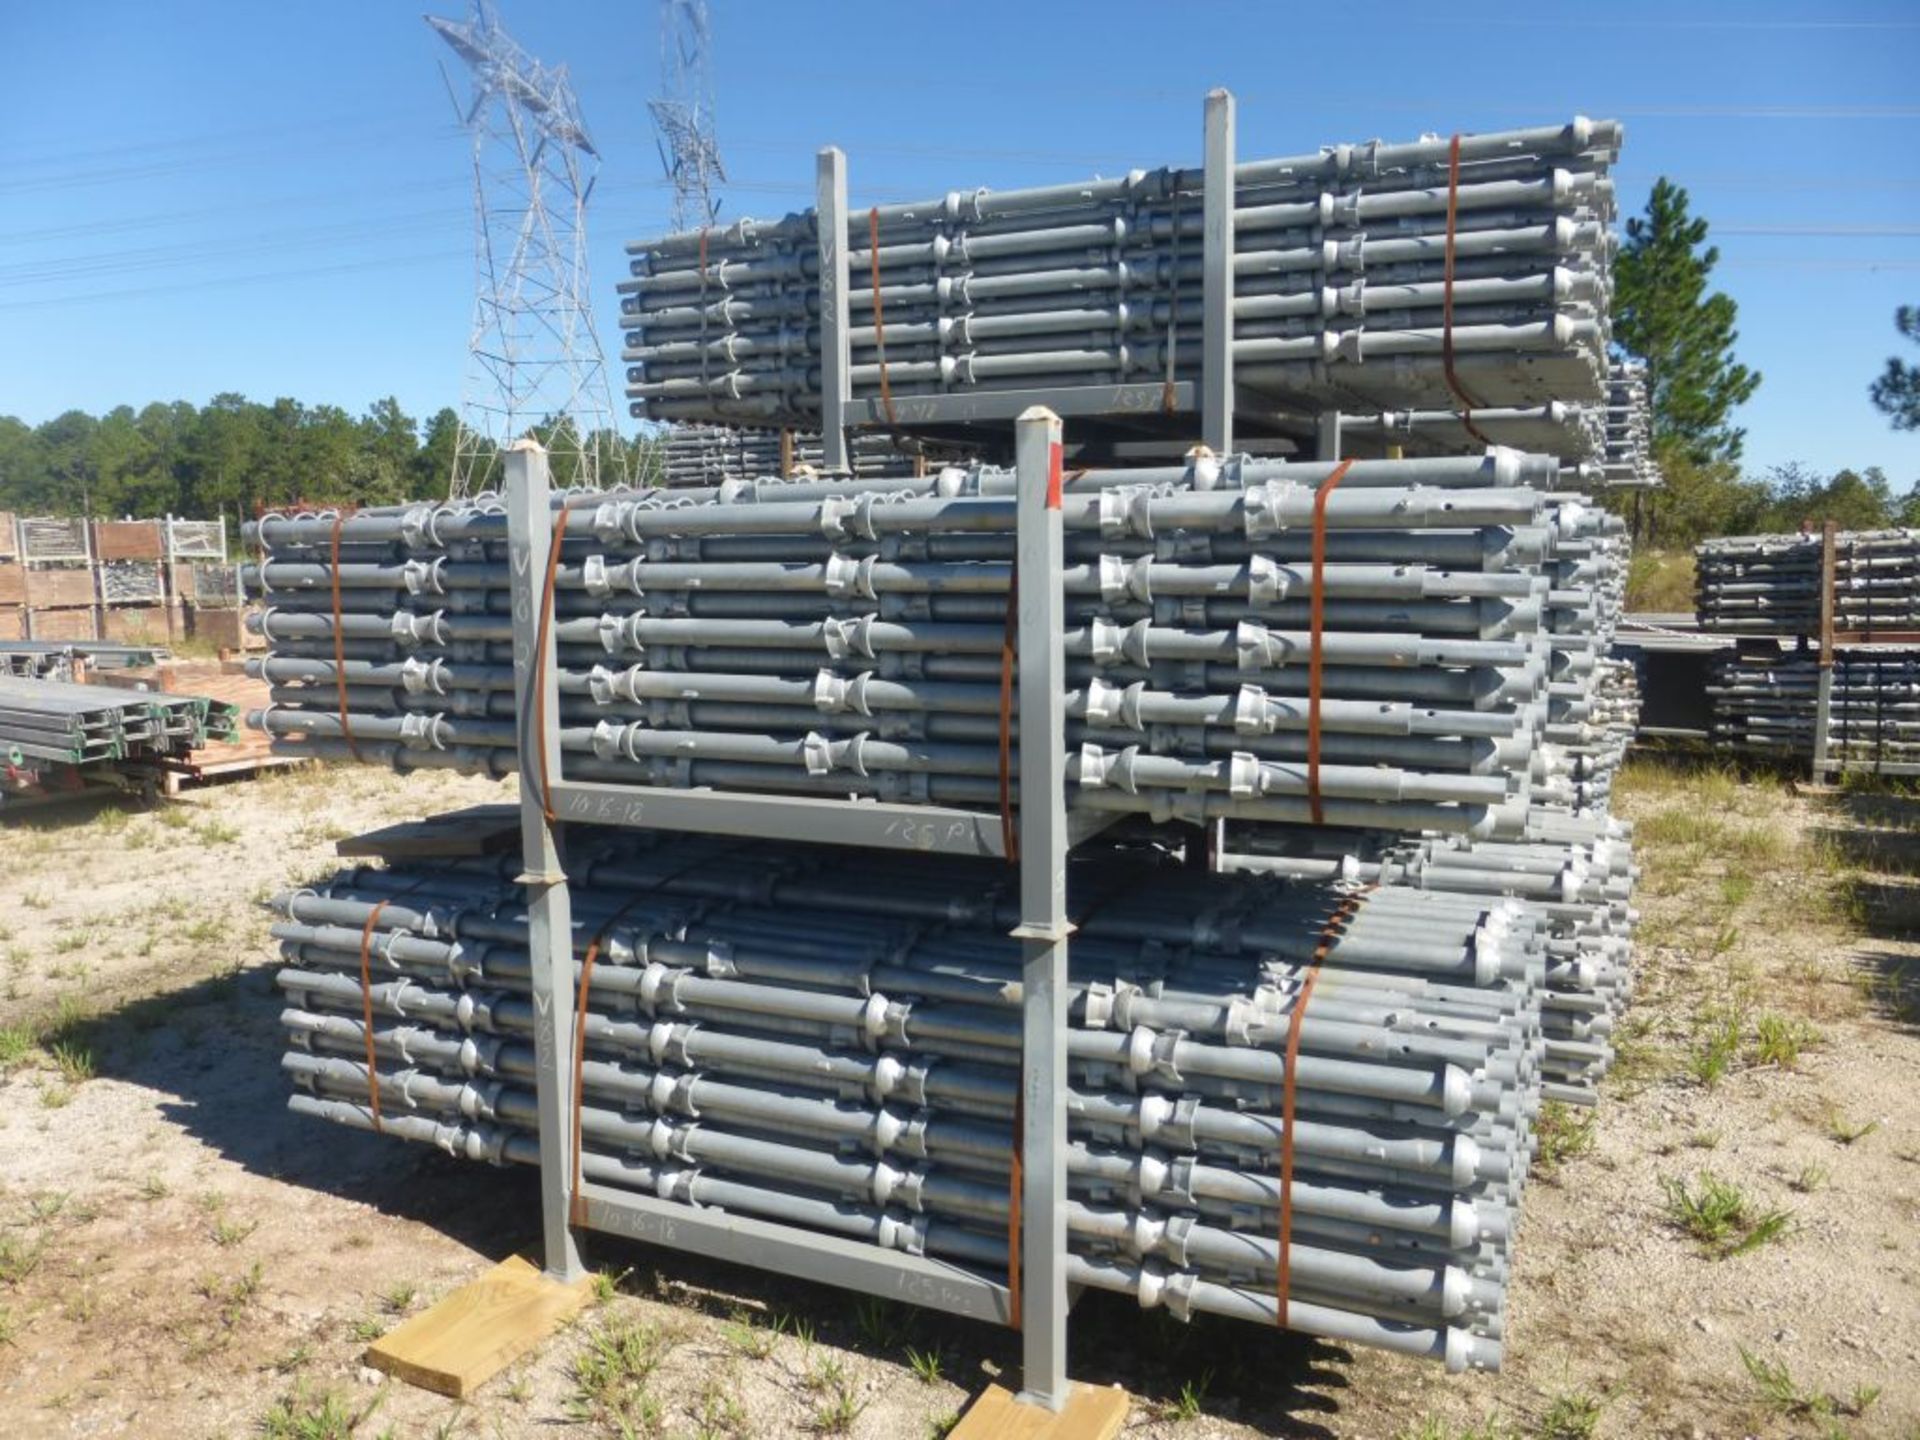 Lot of (250) 8' 2" (2.5M) Vertical 5 Cup; Type: CLV82 - (2) Racks Per Lot - Approximate Weight:7,850 - Image 2 of 10